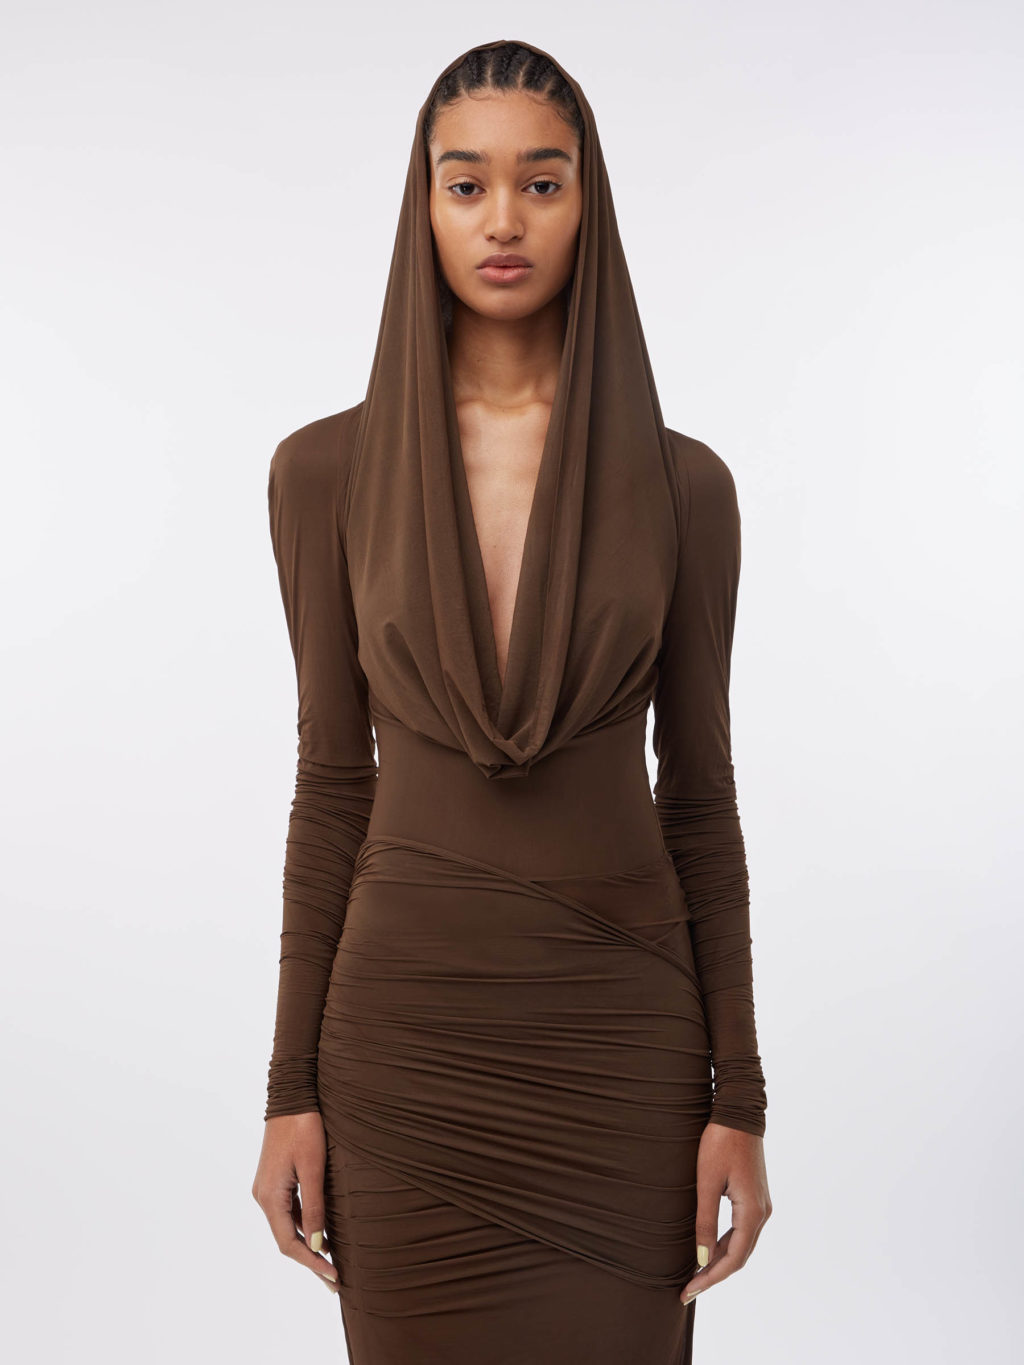 eCommerce body model fashion image by I Heart Studios. A woman wearing a brown dress covering her head.